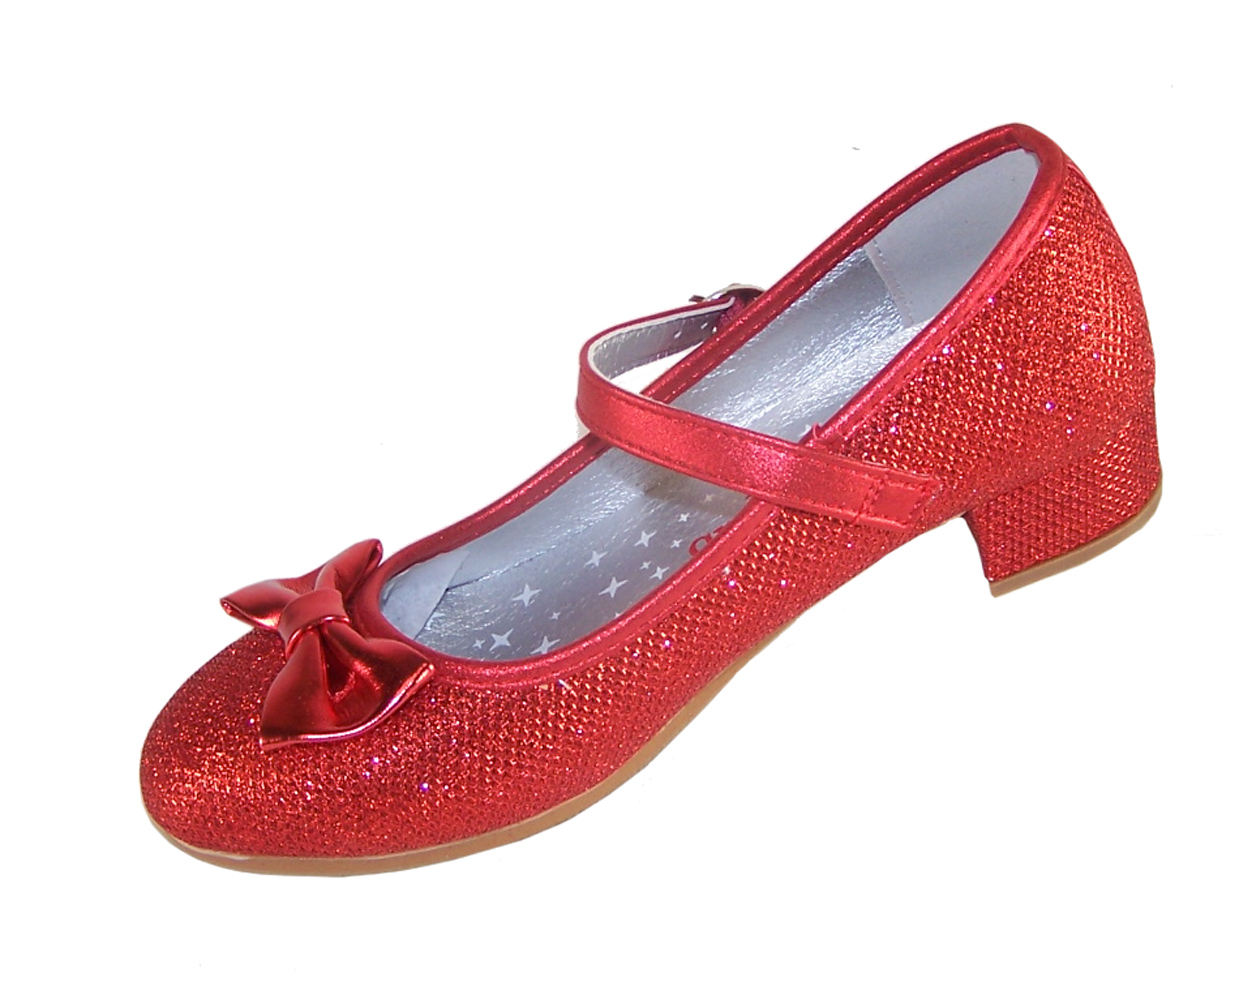 Girls red sparkly heeled shoes with red heart bag-3981